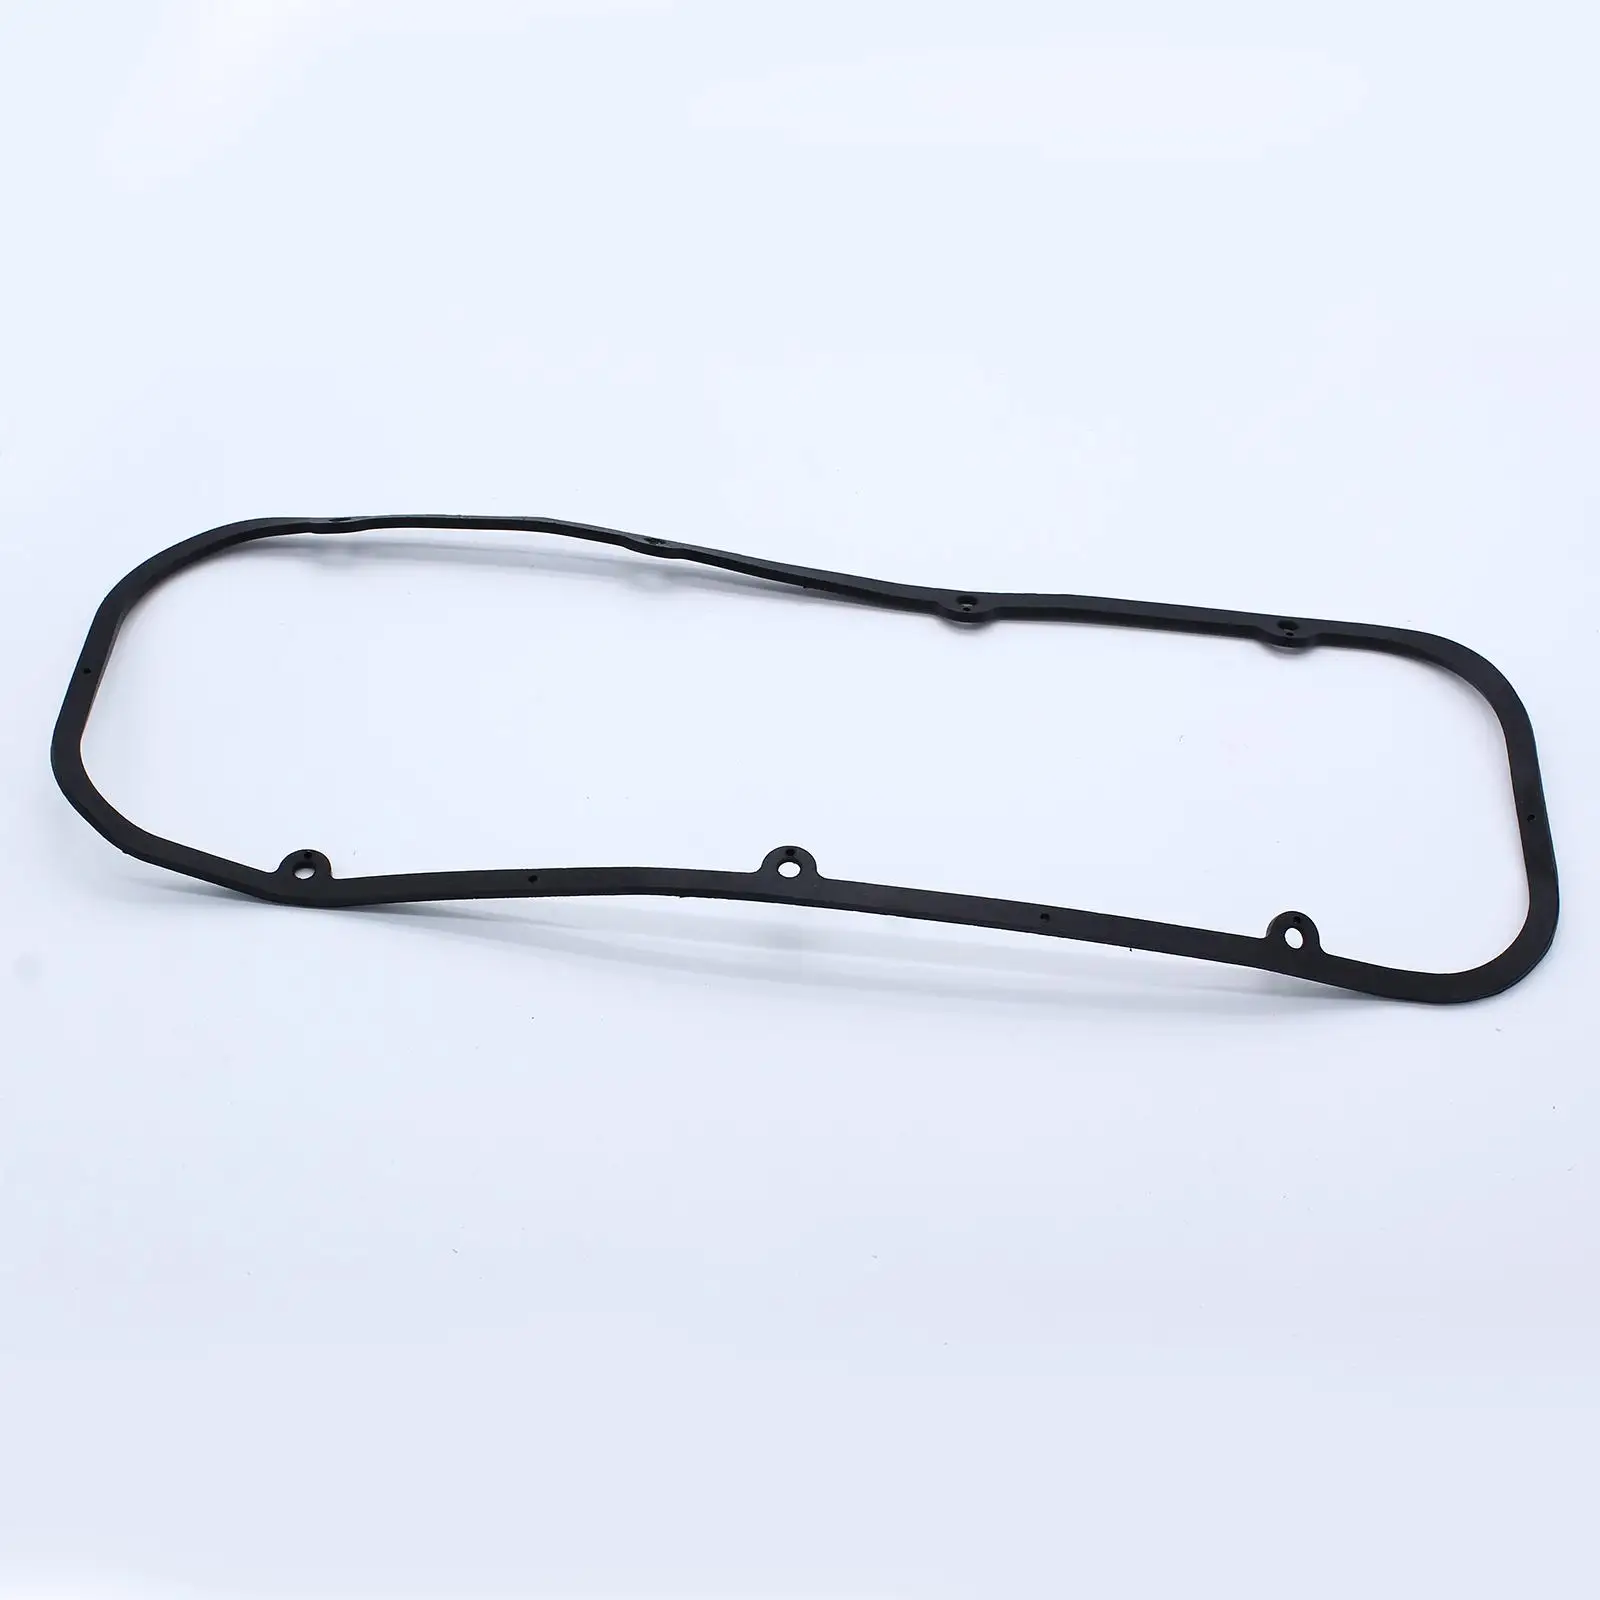 Steel Core Valve Cover Gaskets Black Fit for Chevy BB Engines 472 502